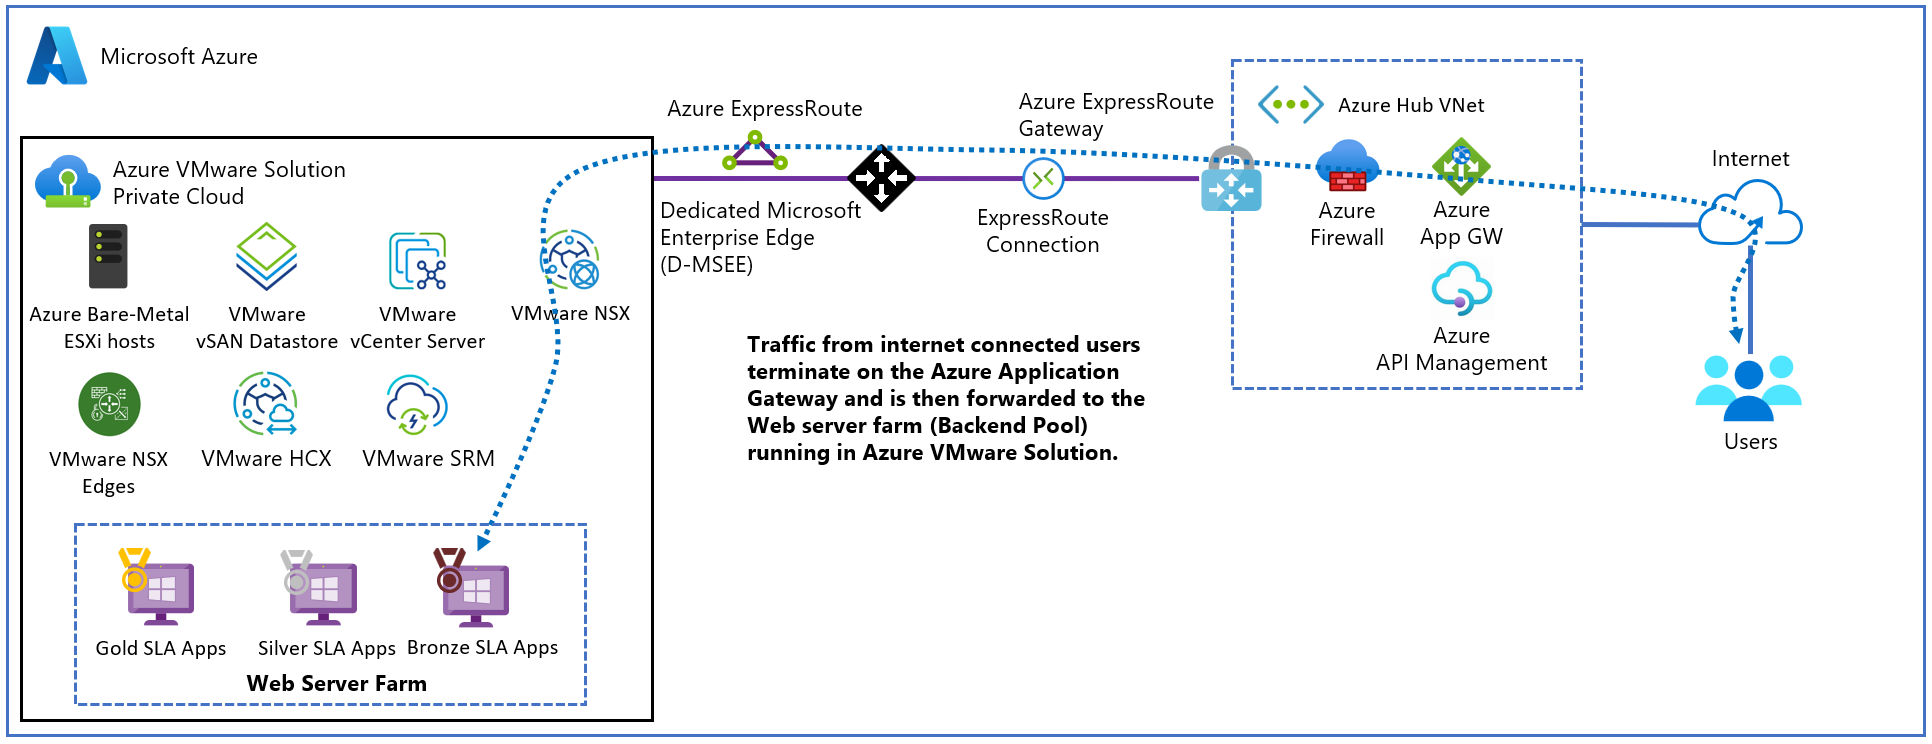 Diagram showing the testing scenario used to validate the Application Gateway with Azure VMware Solution web applications.